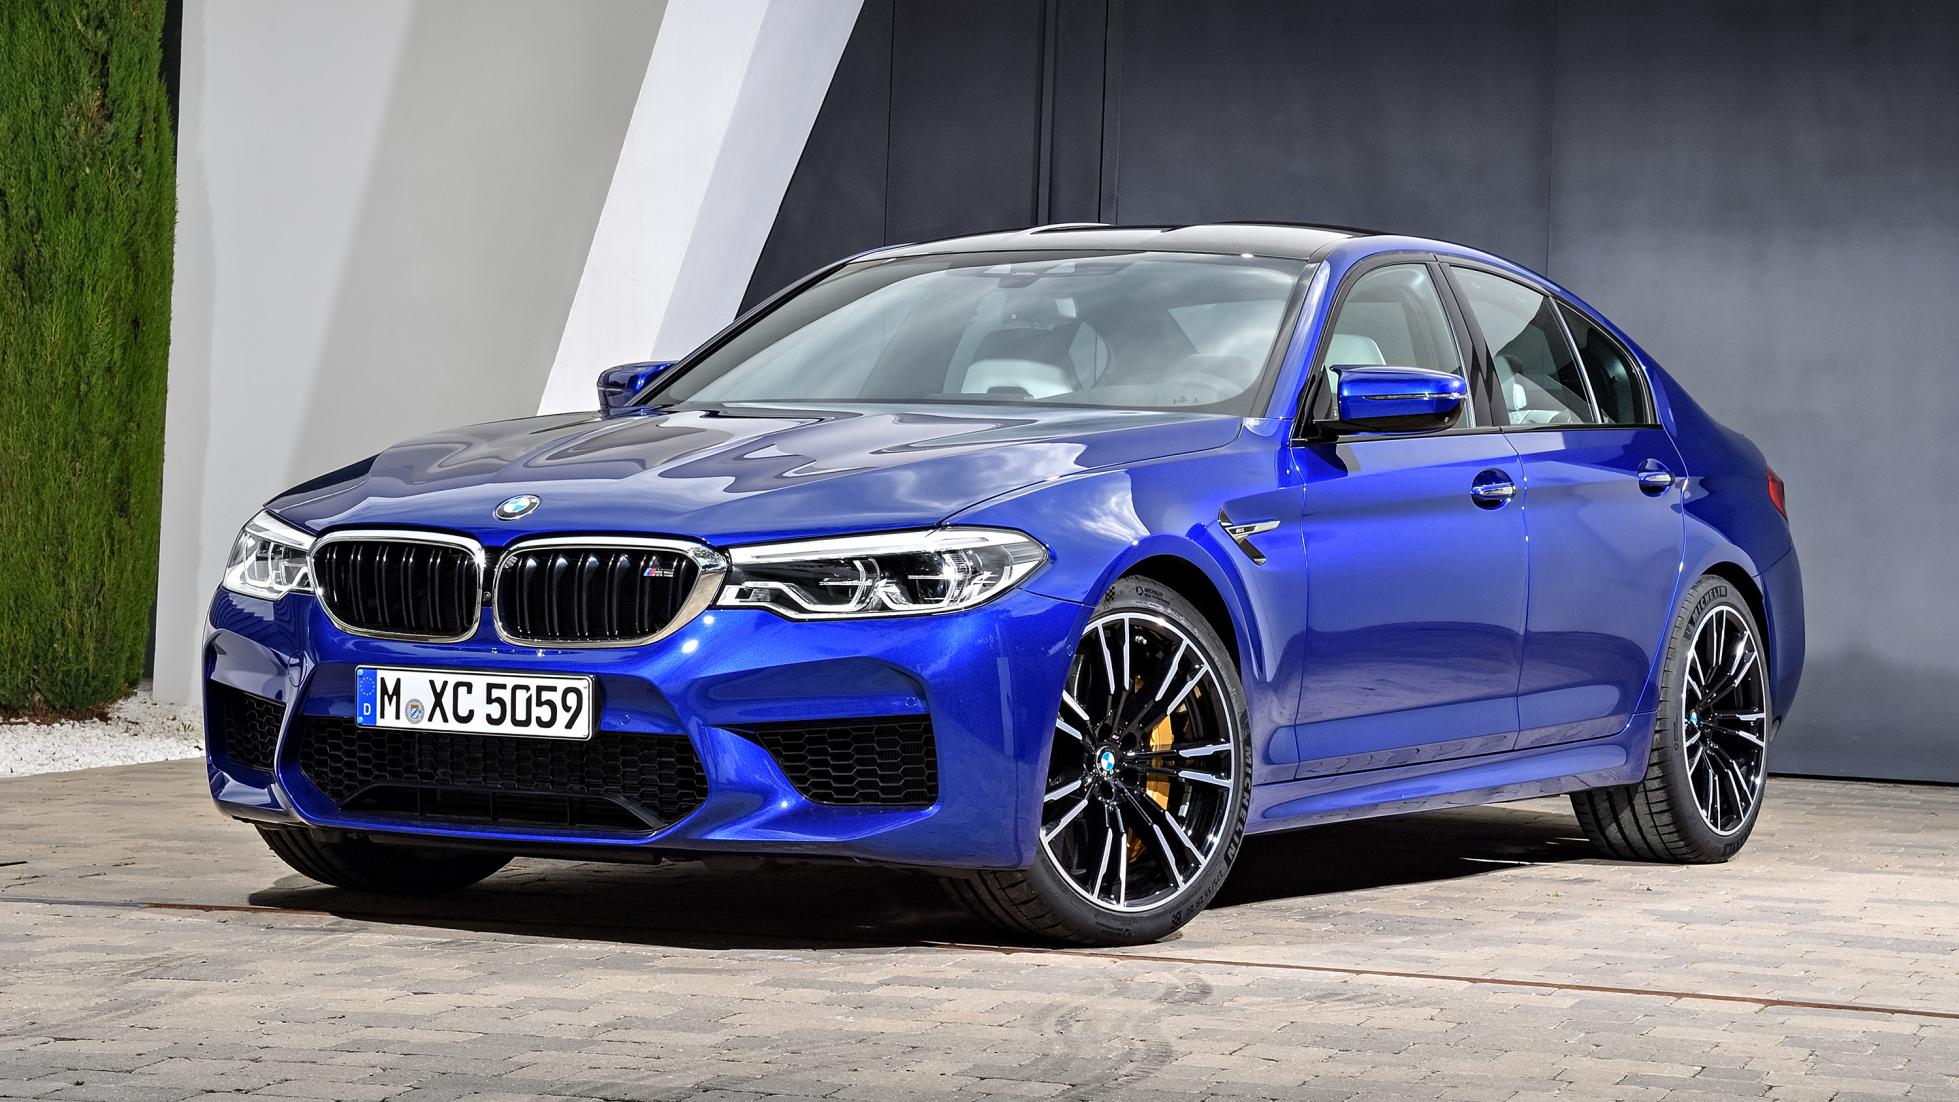 p90272992_highres_the-new-bmw-m5-08-20